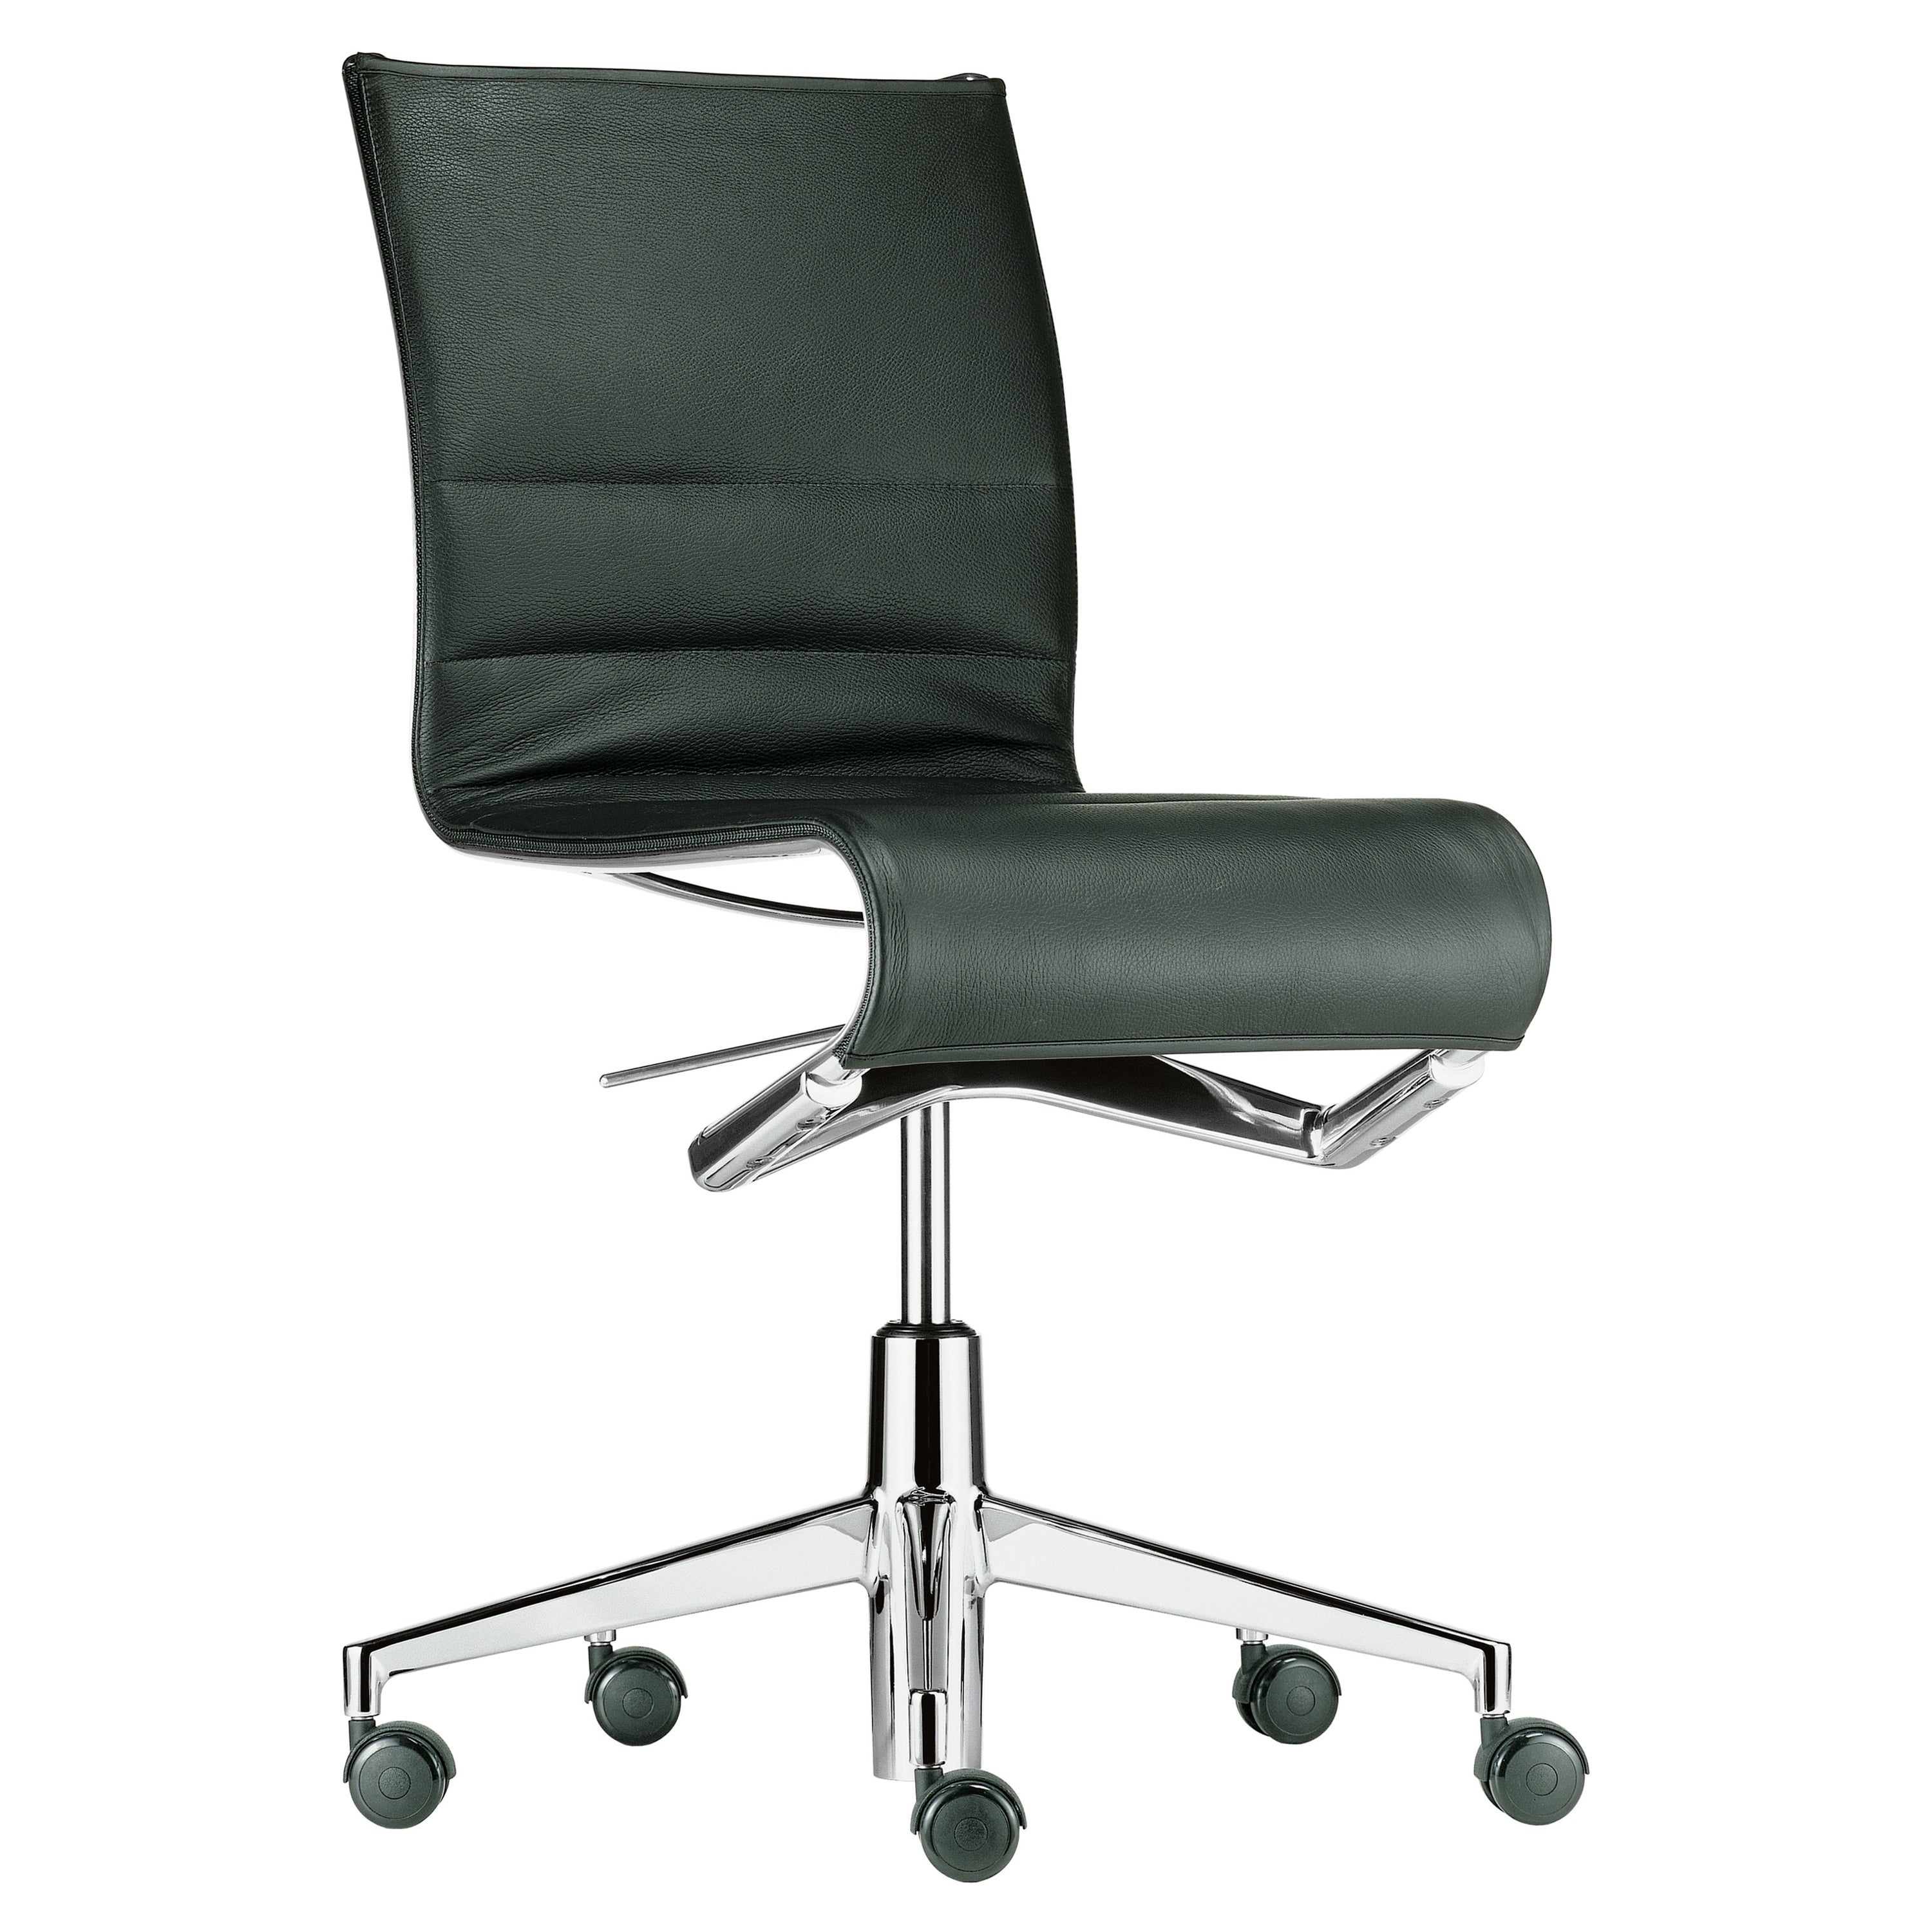 Alias 432 Rollingframe 44 Chair Bin lack Leather with Chromed Aluminum Frame For Sale